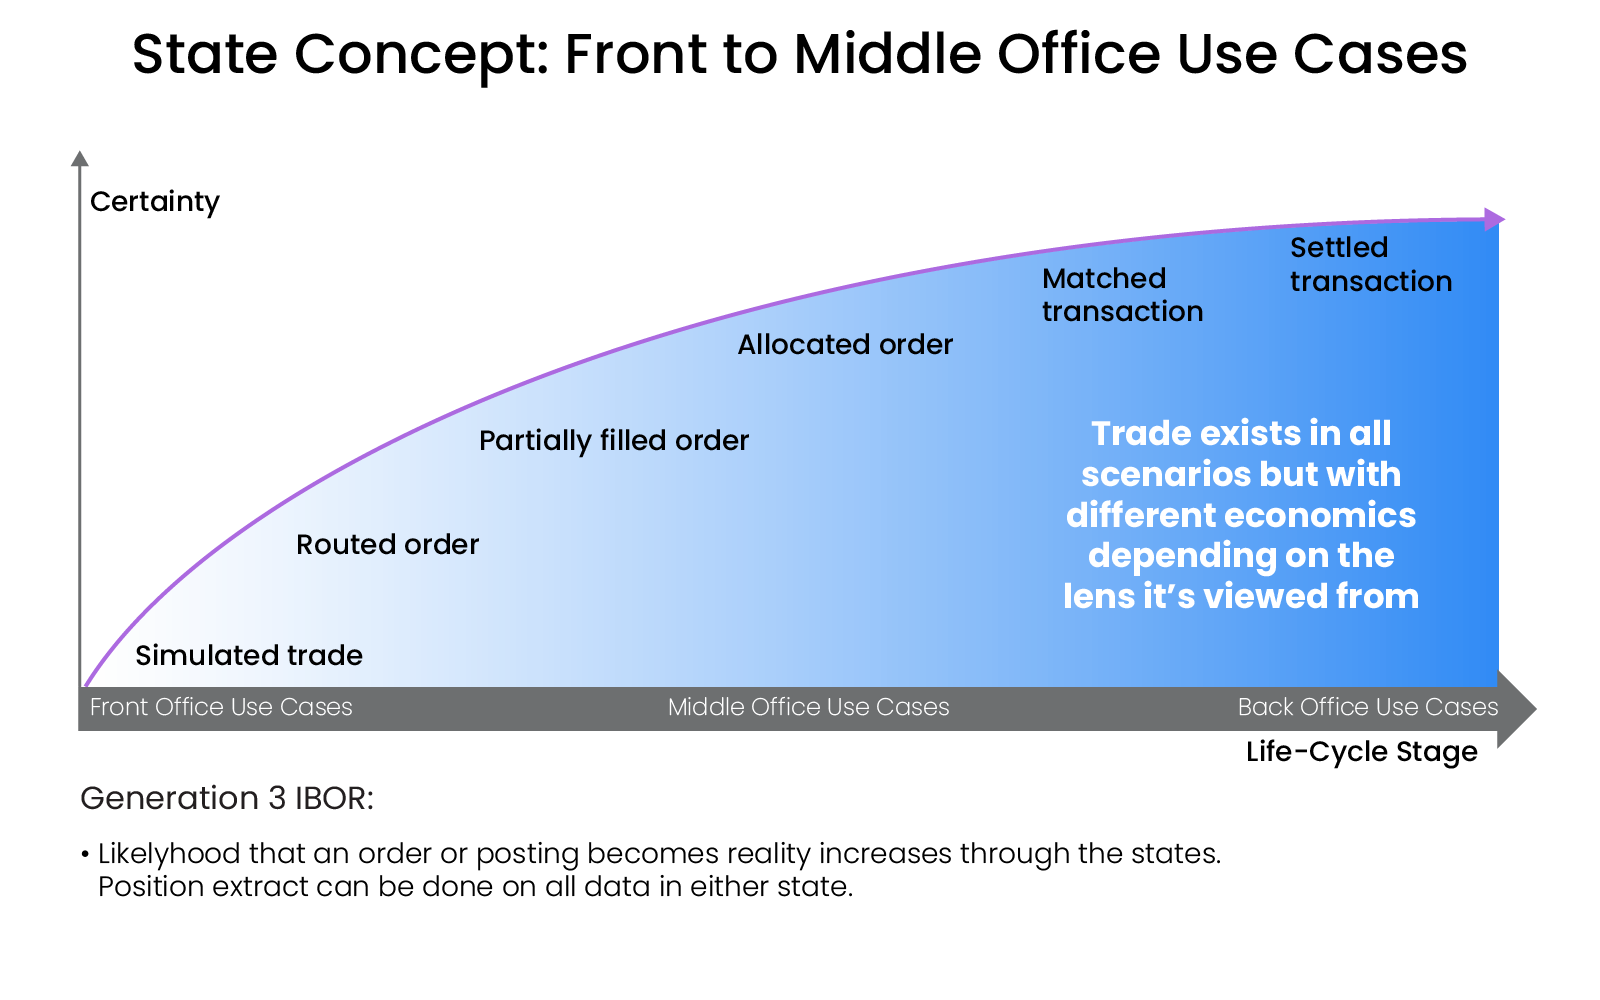 Transaction lifecycle stages